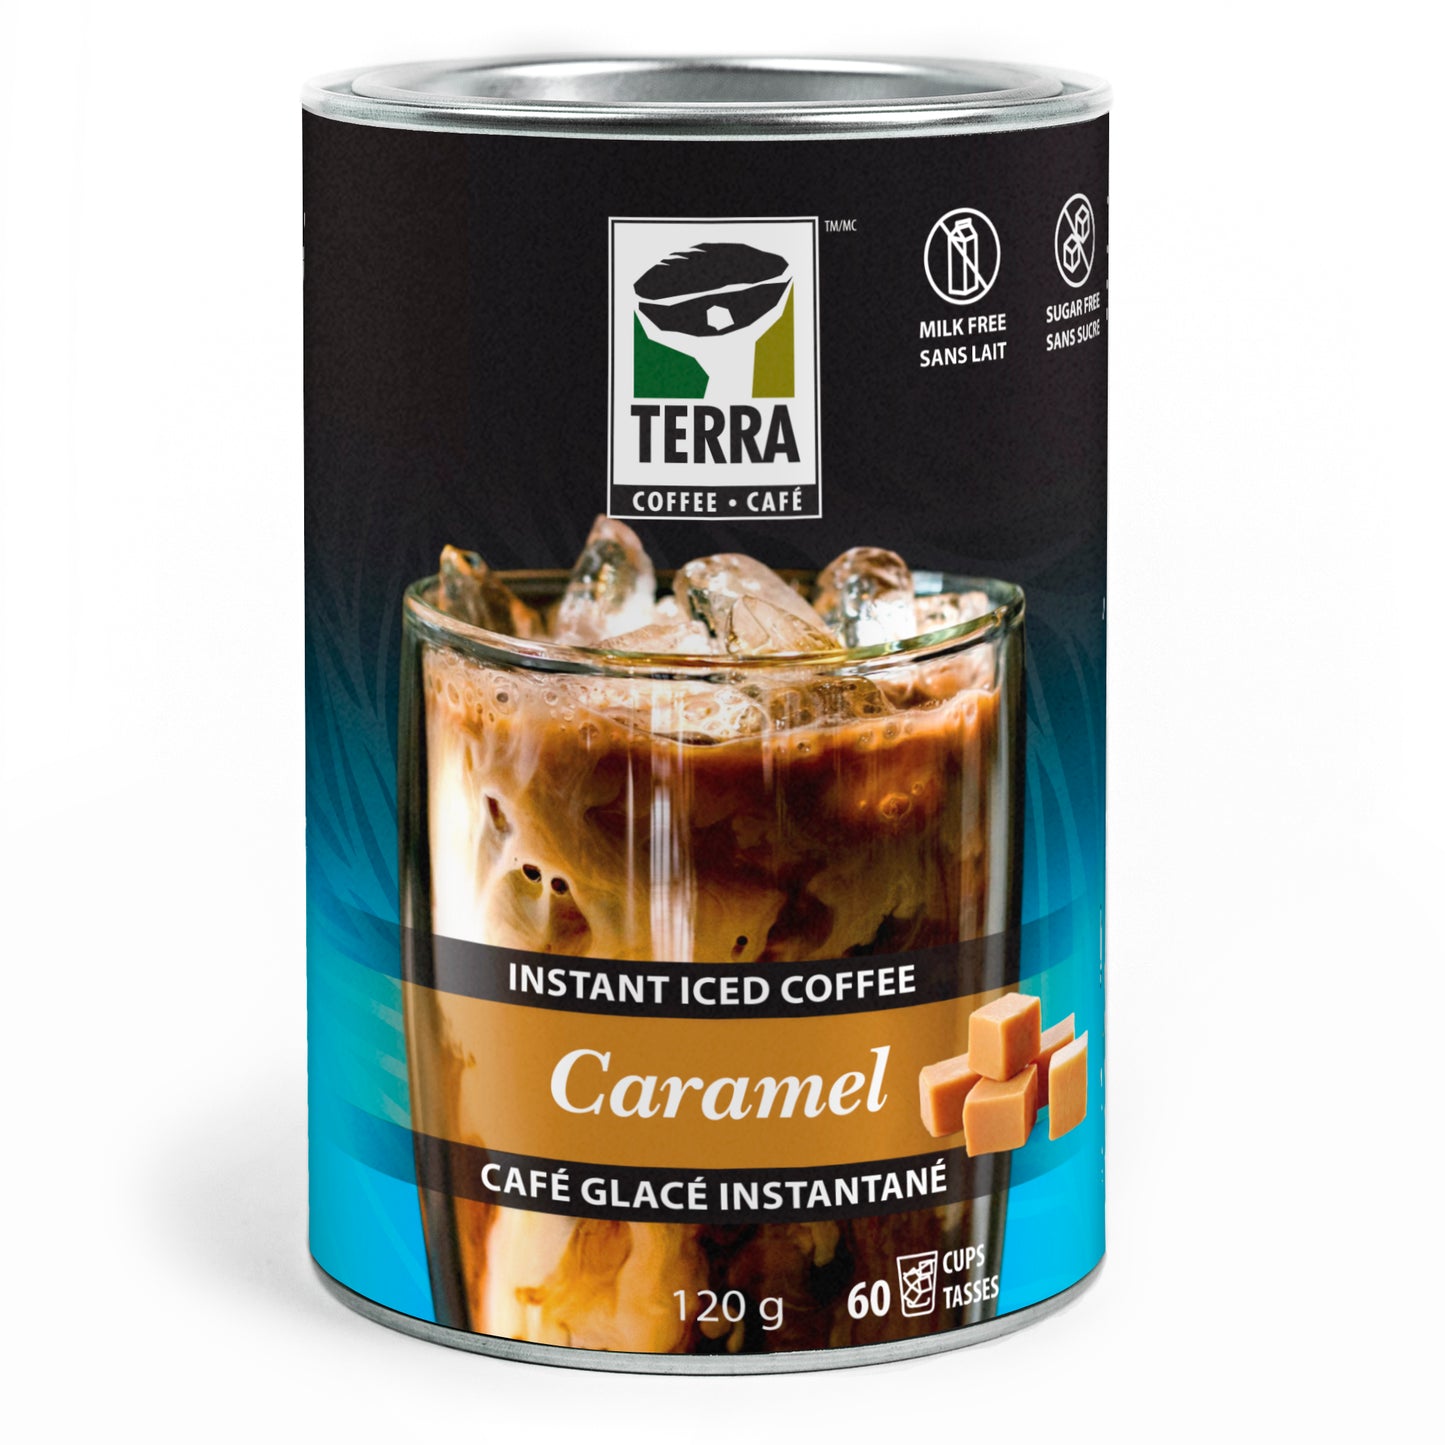 INSTANT ICED COFFEE - CARAMEL